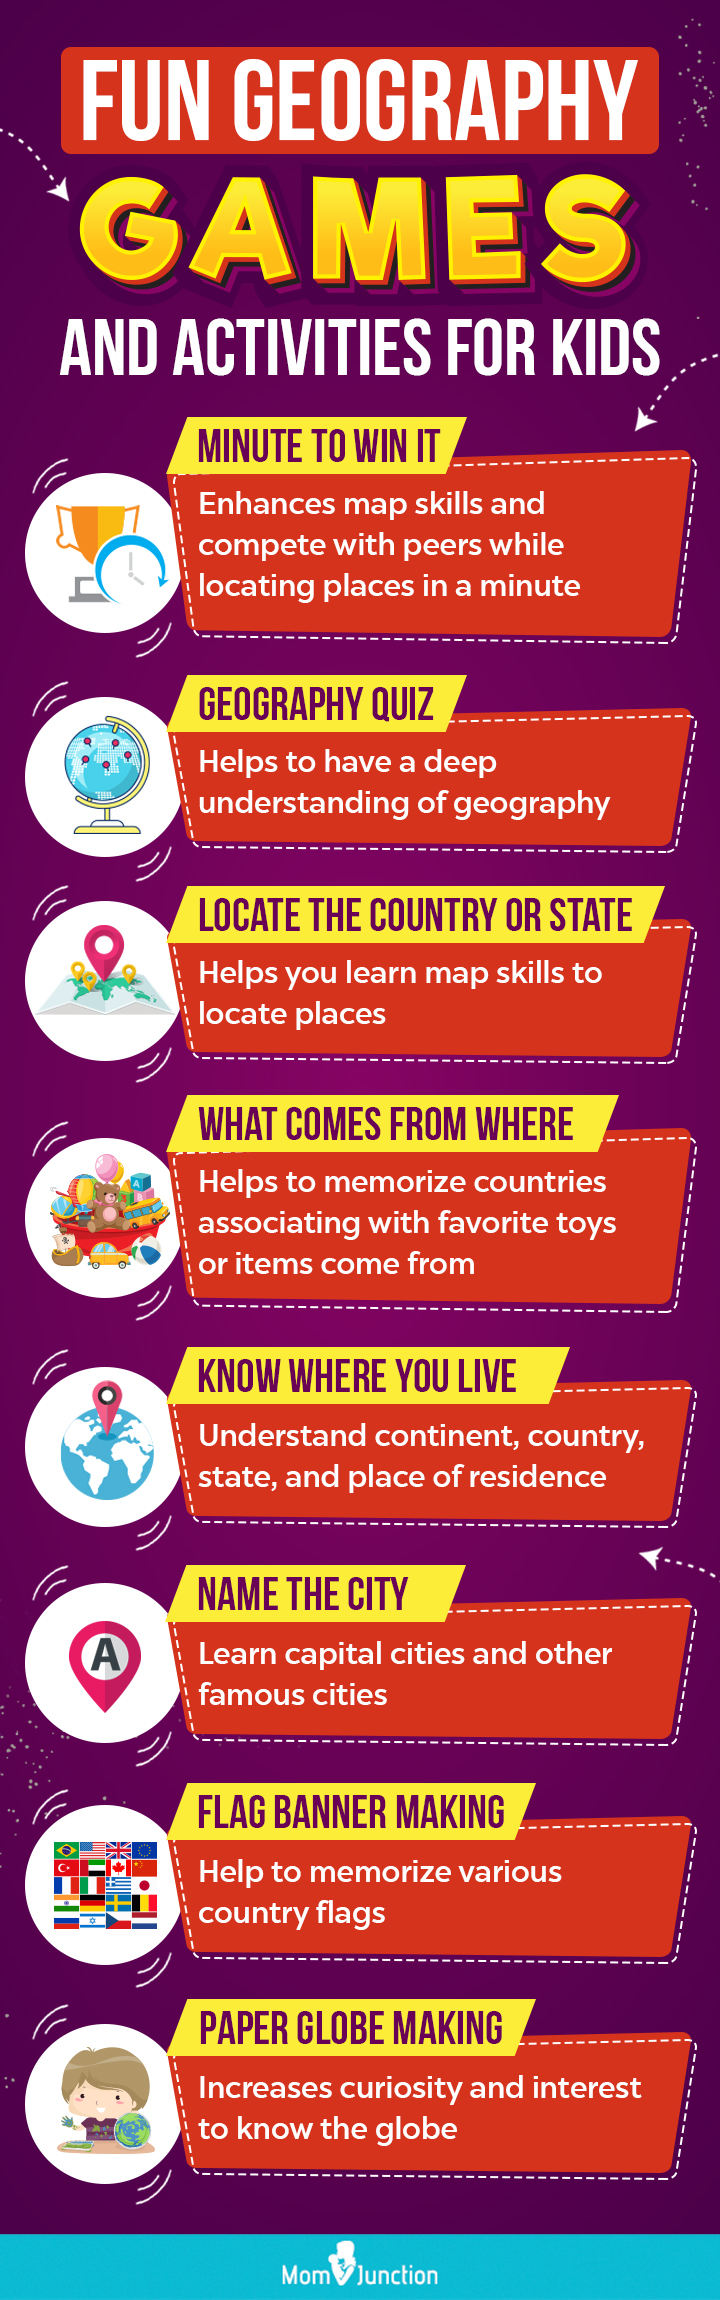 geography games and activities for kids (Infographic)